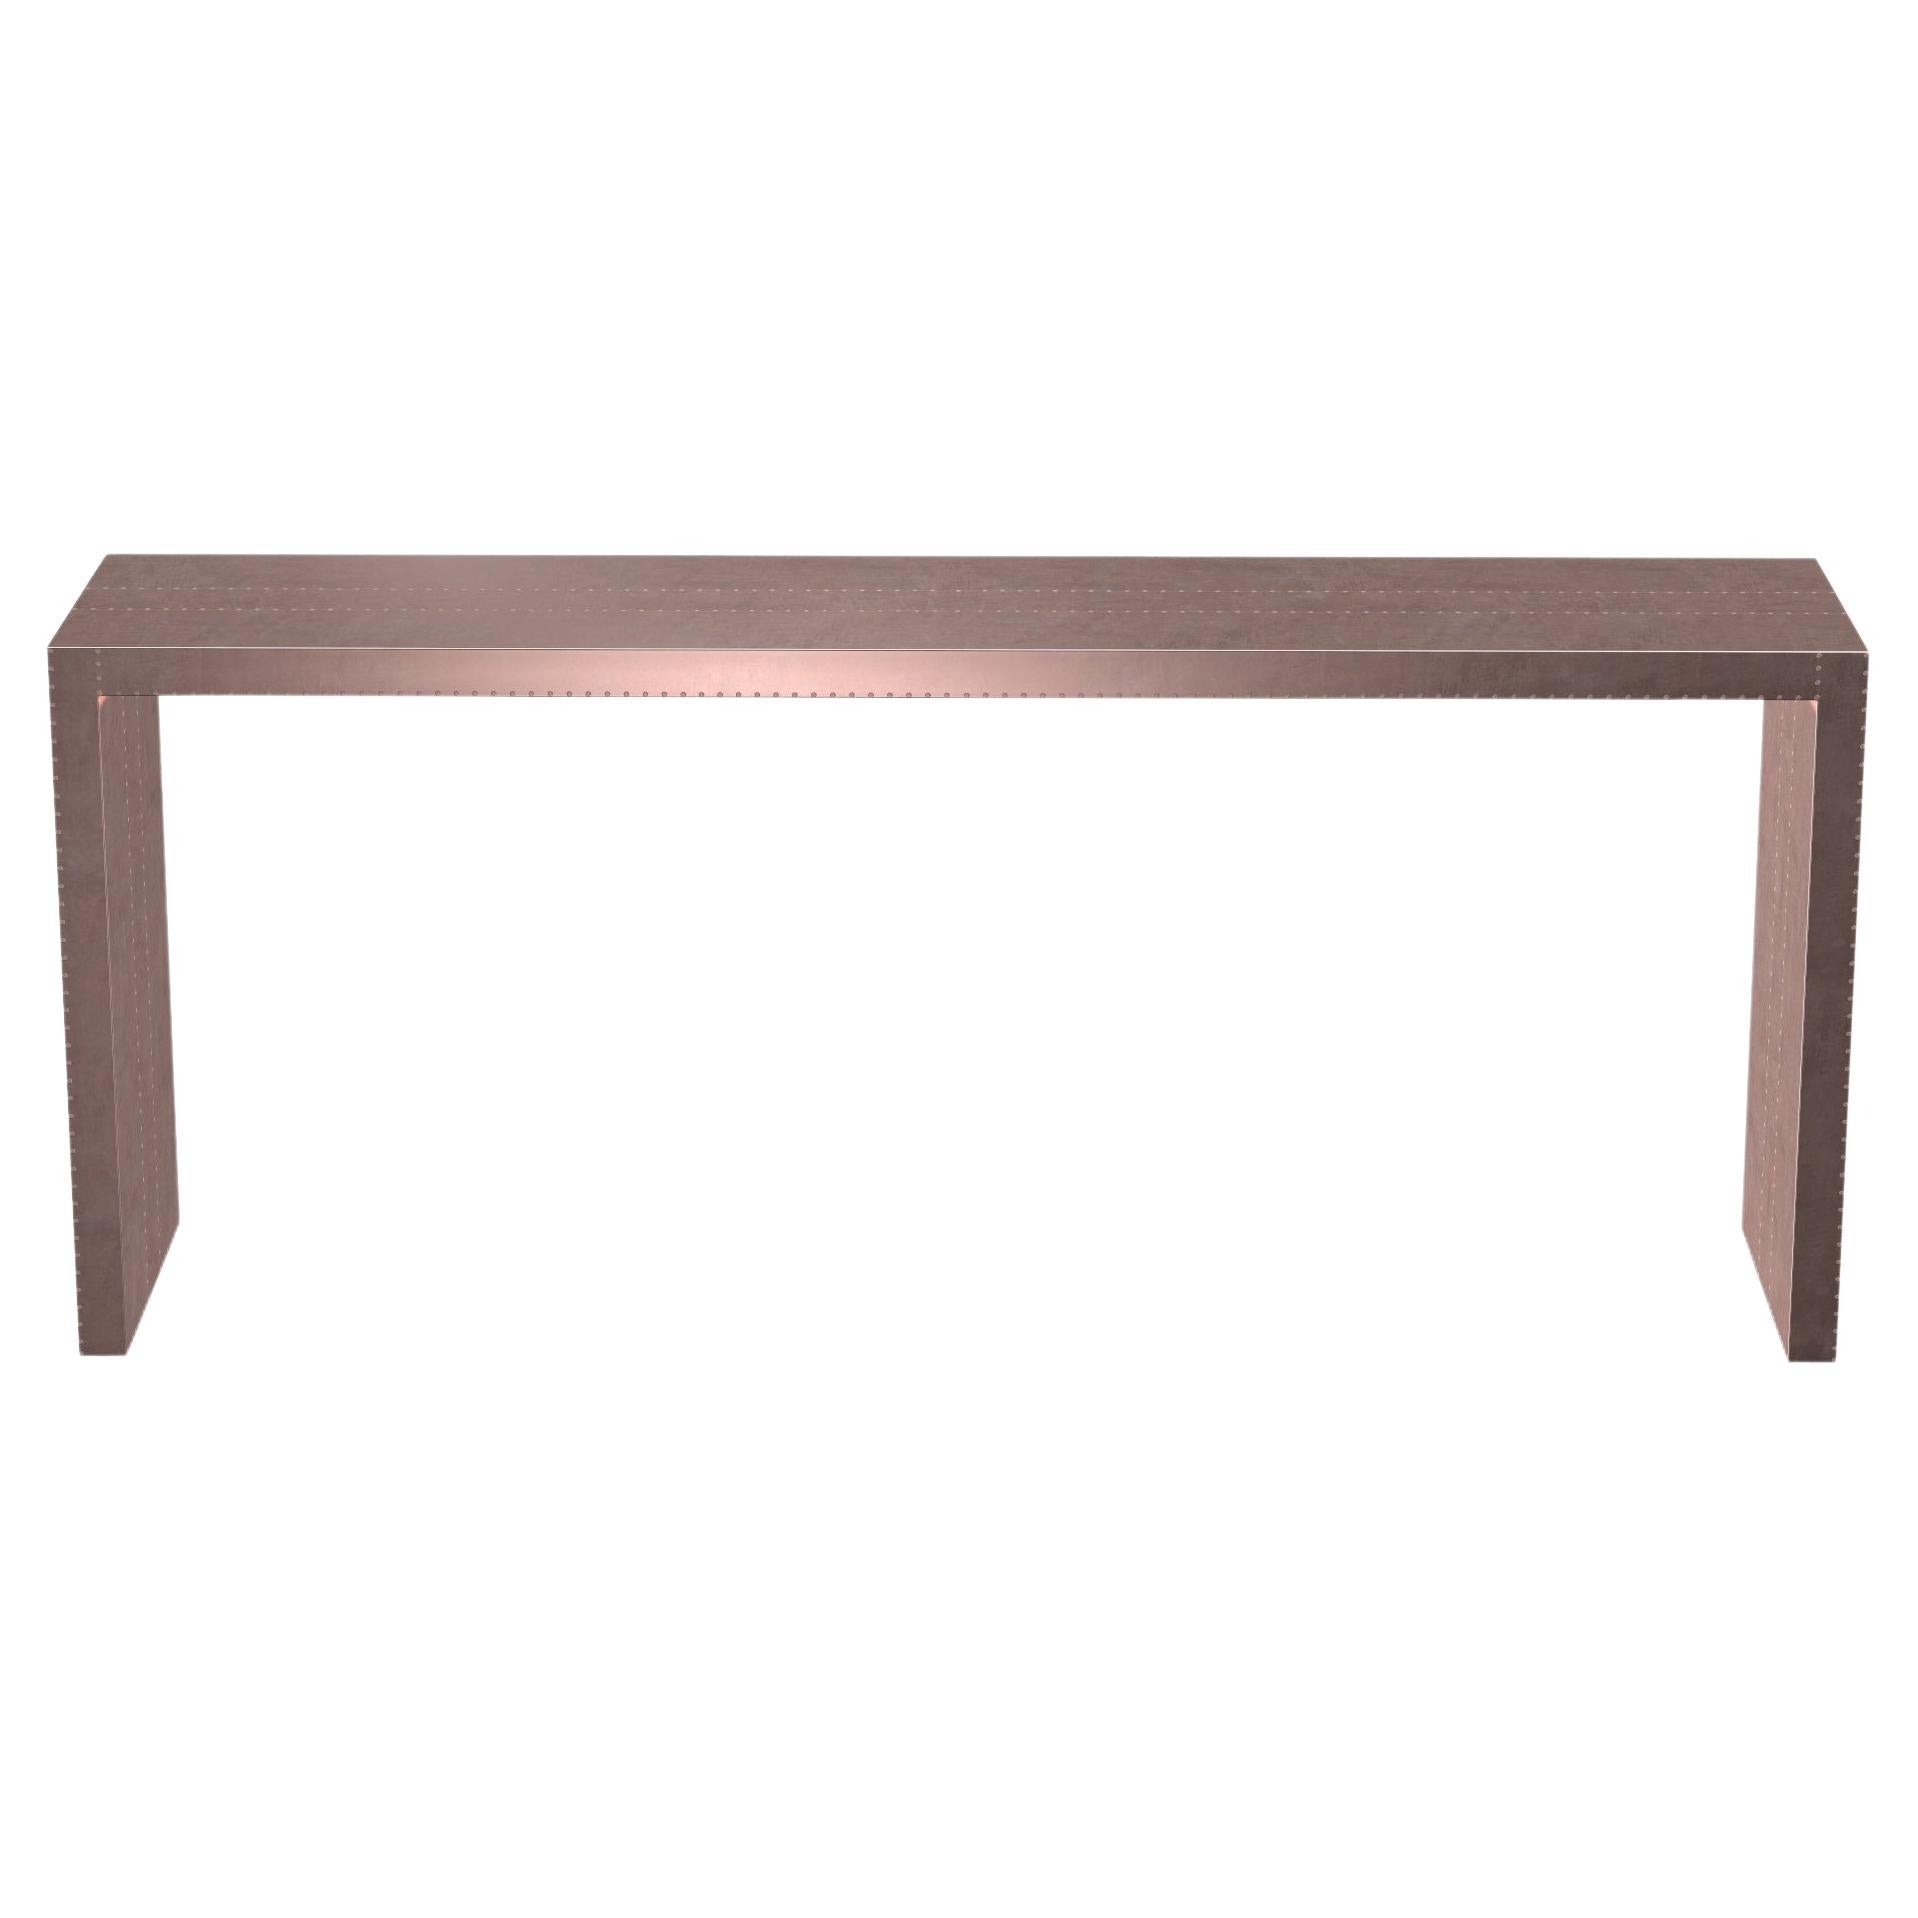 Art Deco Industrial and Work Tables Rectangular Console in Smooth Copper 